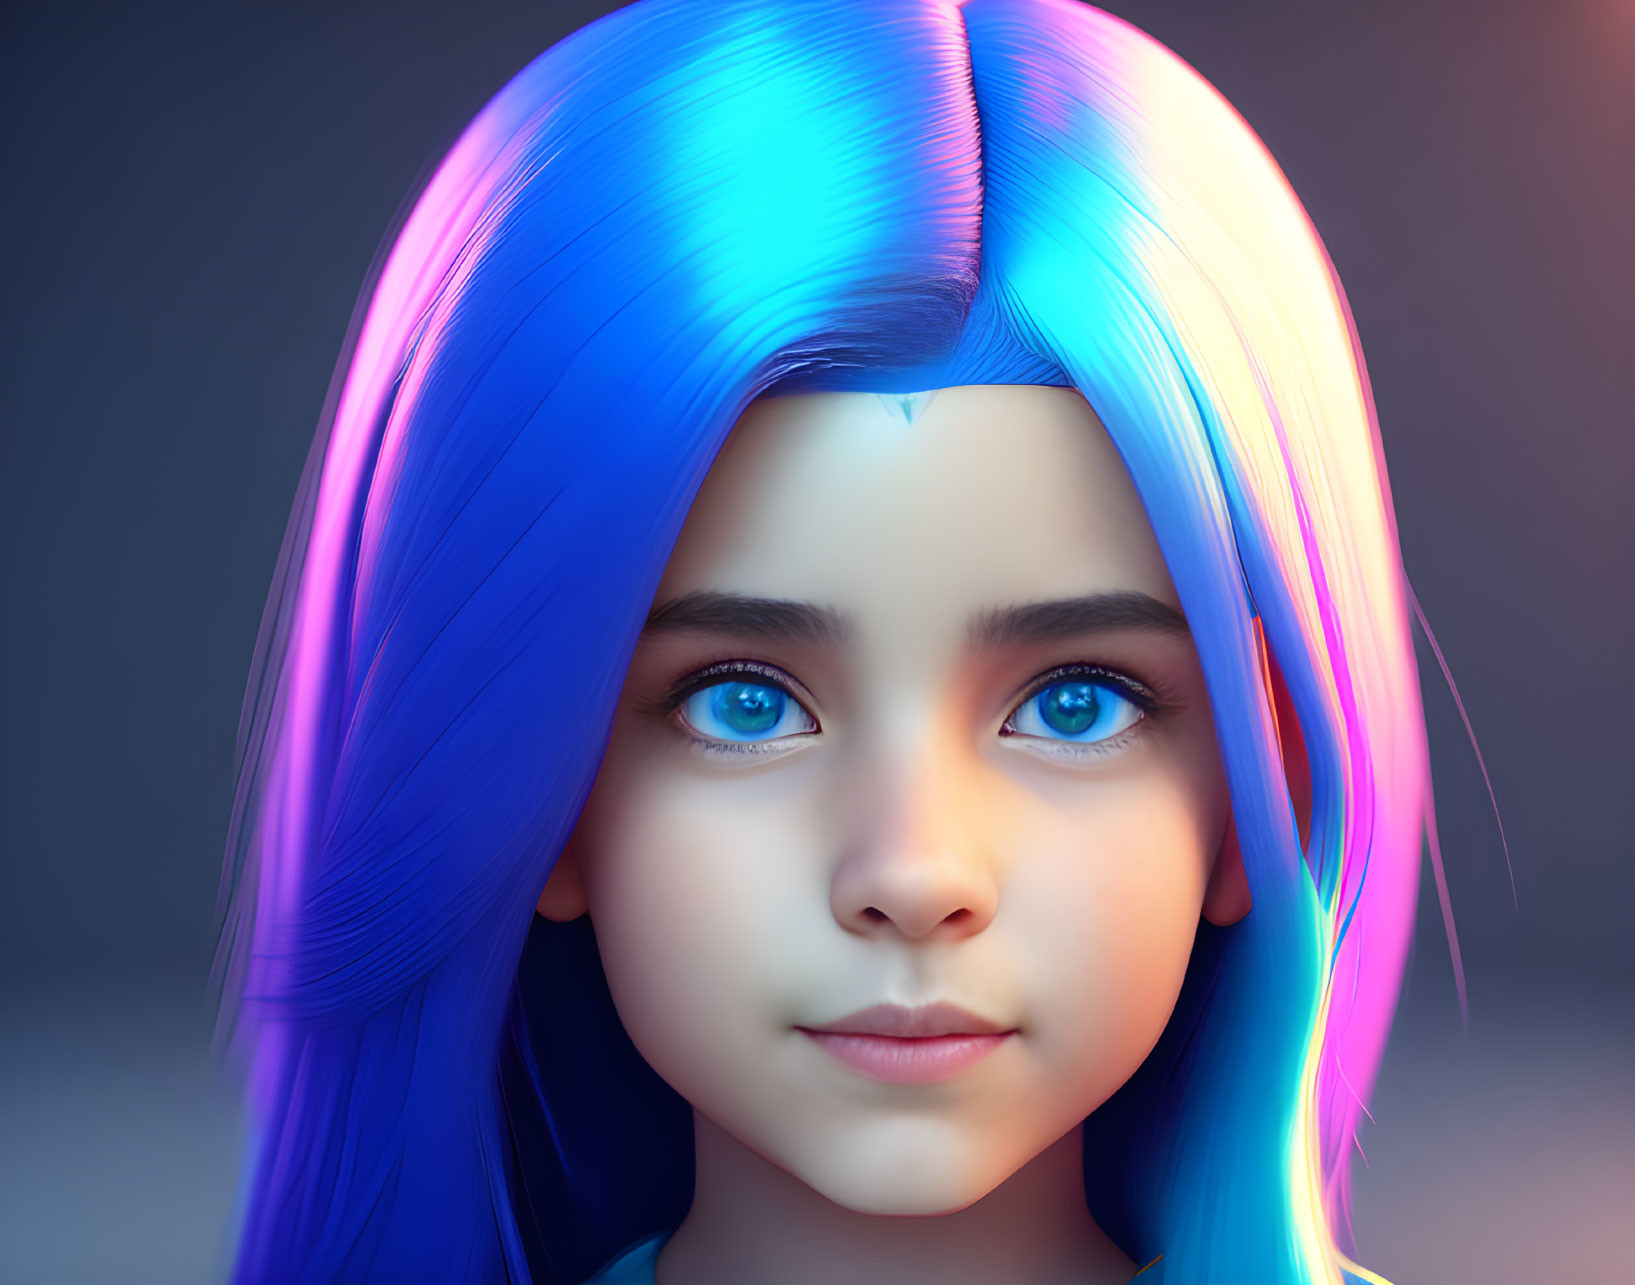 Girl with Blue Eyes and Rainbow Hair Gradient in Dramatic Lighting